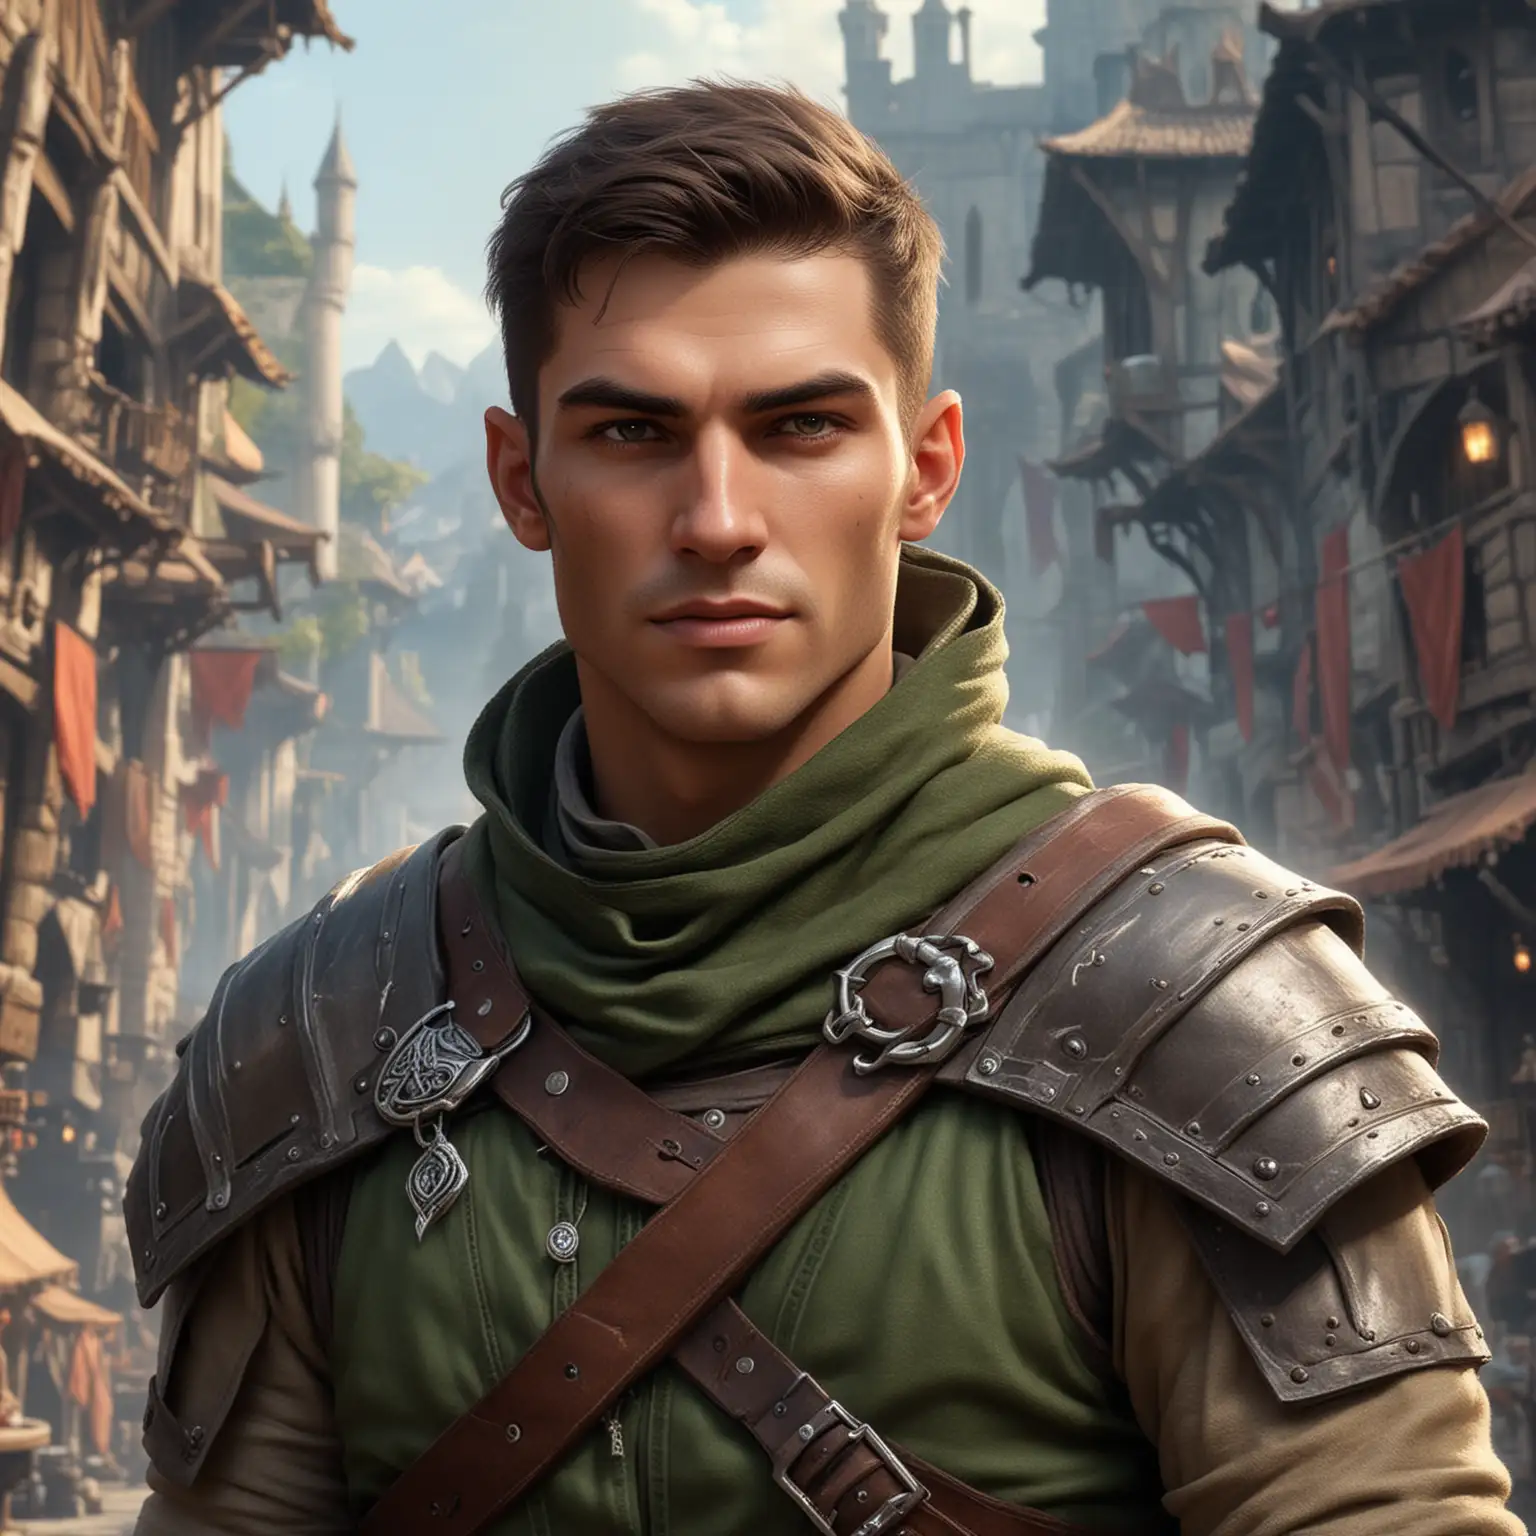 Handsome CleanShaven Human Rogue in a Fantasy Setting